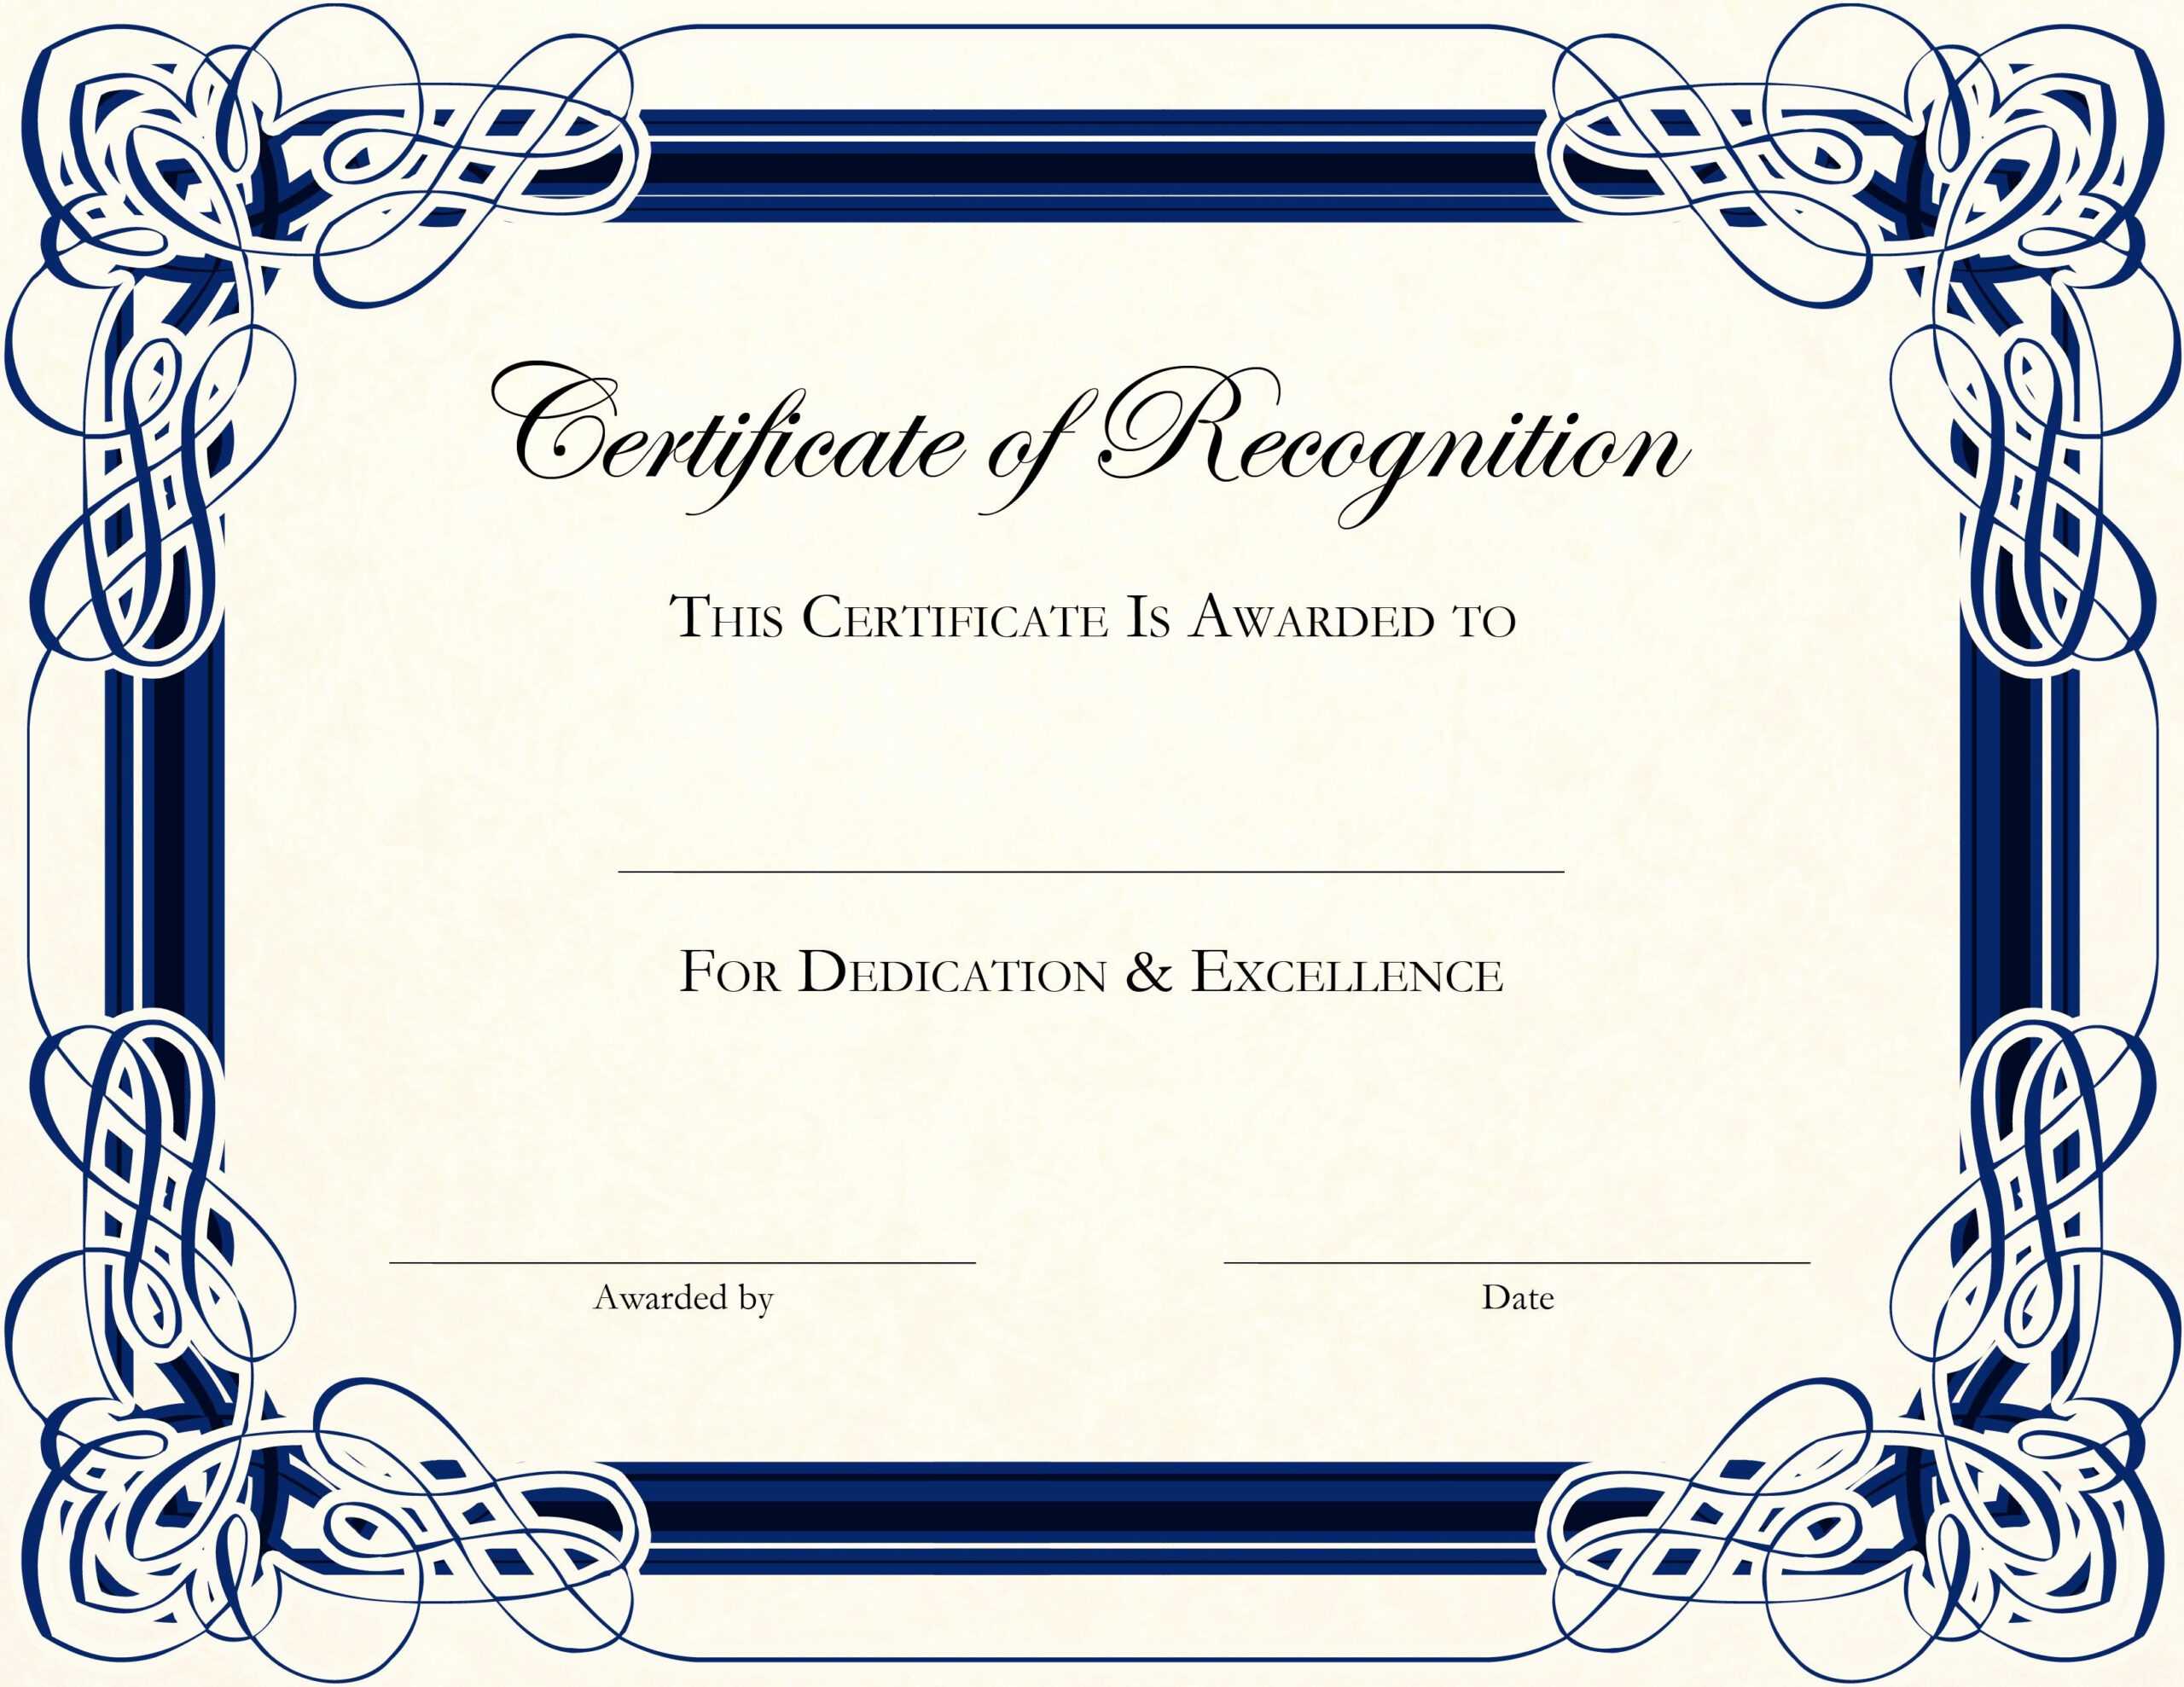 30 Award Certificate Template Free | Tate Publishing News With Free Funny Award Certificate Templates For Word